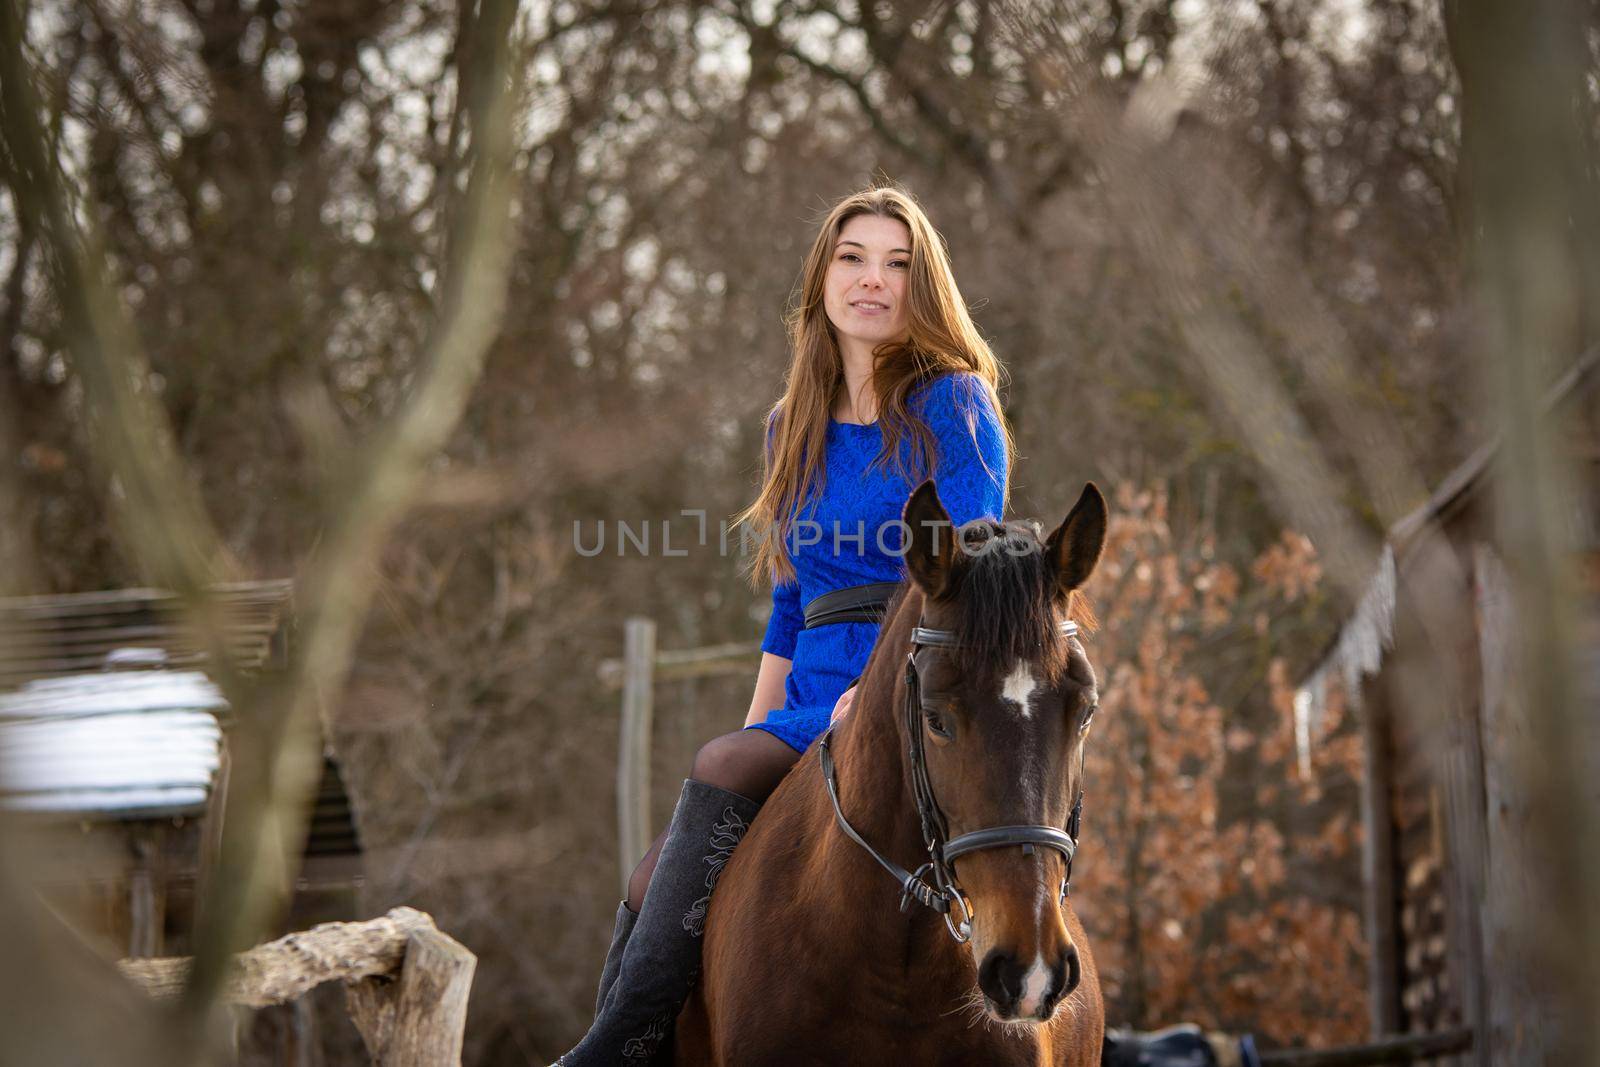 A girl in a blue dress sits on a horse against the backdrop of a winter forest by Madhourse